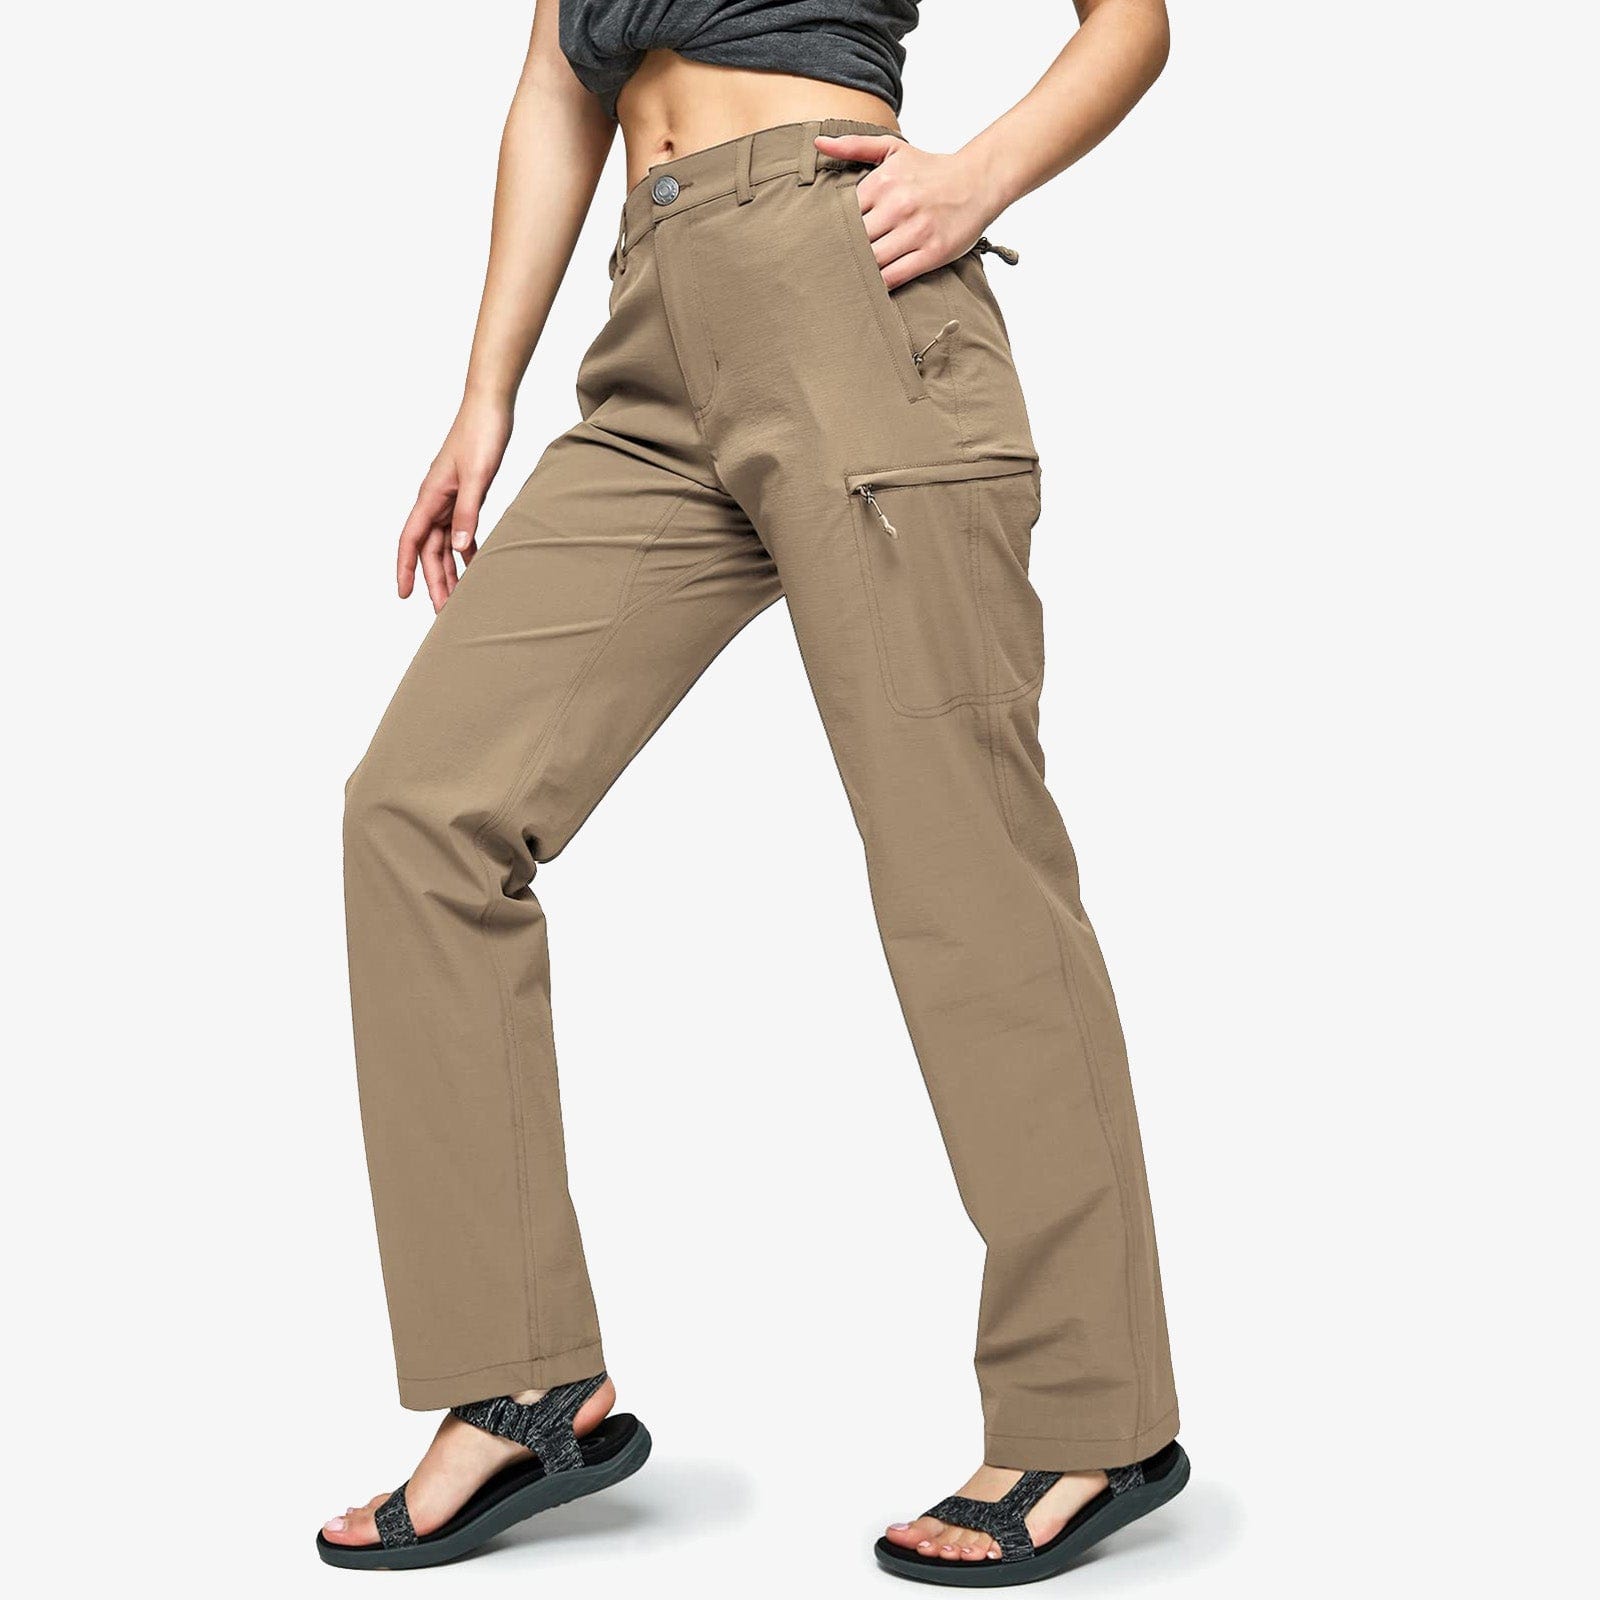 Women's Orvis Guide Pants Fishing Pants Stretchable Quick-Drying | Quick- Drying, Fishing – Outdoor Equipped